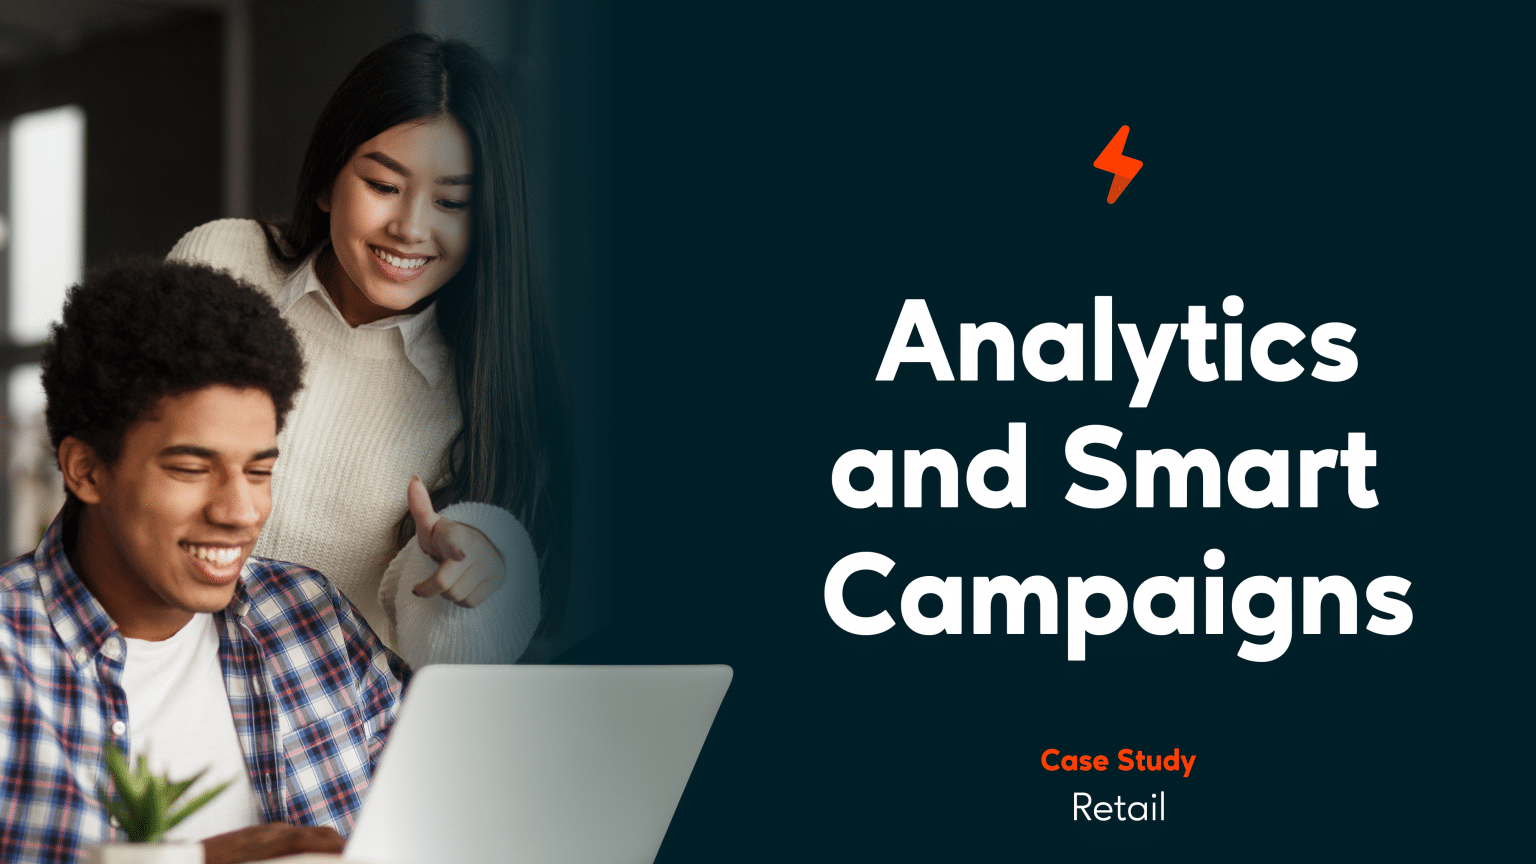 Heroleads' smart campaigns and analytics helped increase ROI by 150% for a leading retail company.-01